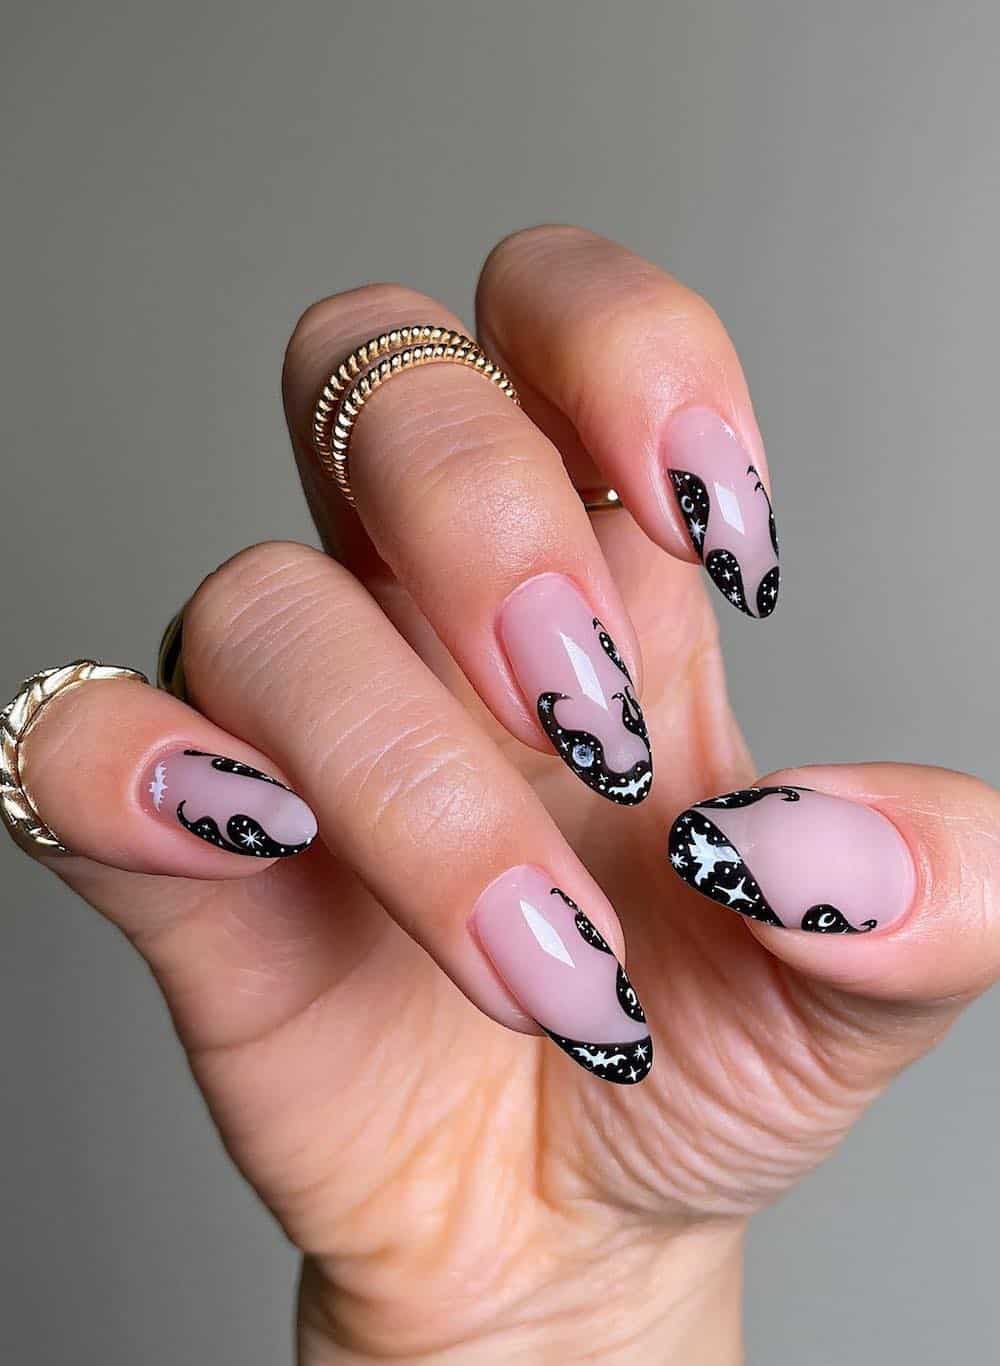 long nude almond nails with swirling black tips and mystical nail art